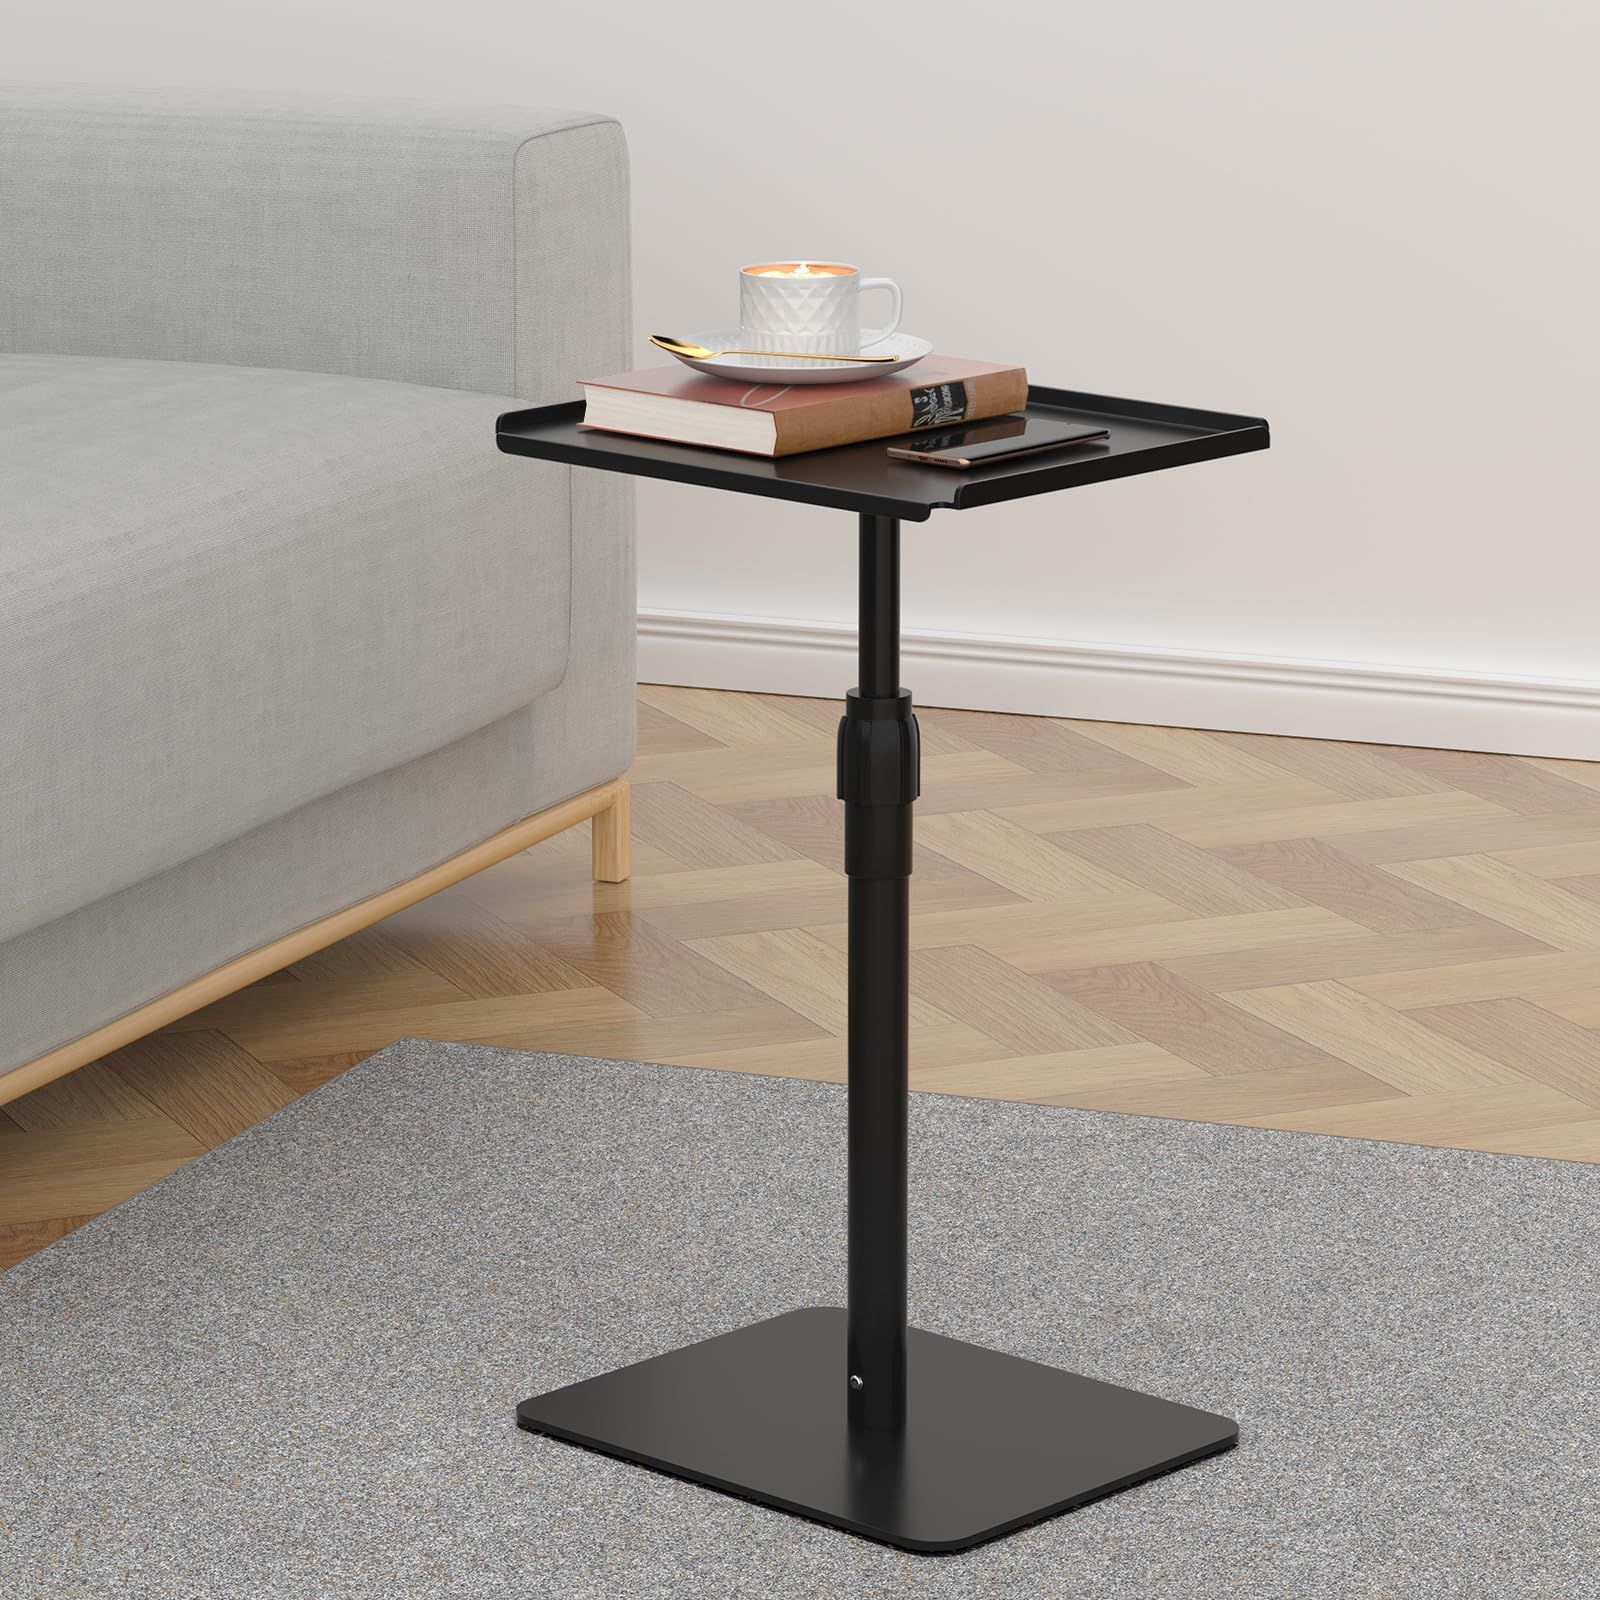 Recent Metal Side Tables For Living Spaces Regarding Amazon: Rchyfeed Height Adjustable End Table, Small Metal Side Table  For Small Spaces, Square Drink Tables For Living Room Bedroom Dorm Office,  Place Snacks, Books, Meals, Magazines, Phones On The Top : (Photo 2 of 10)